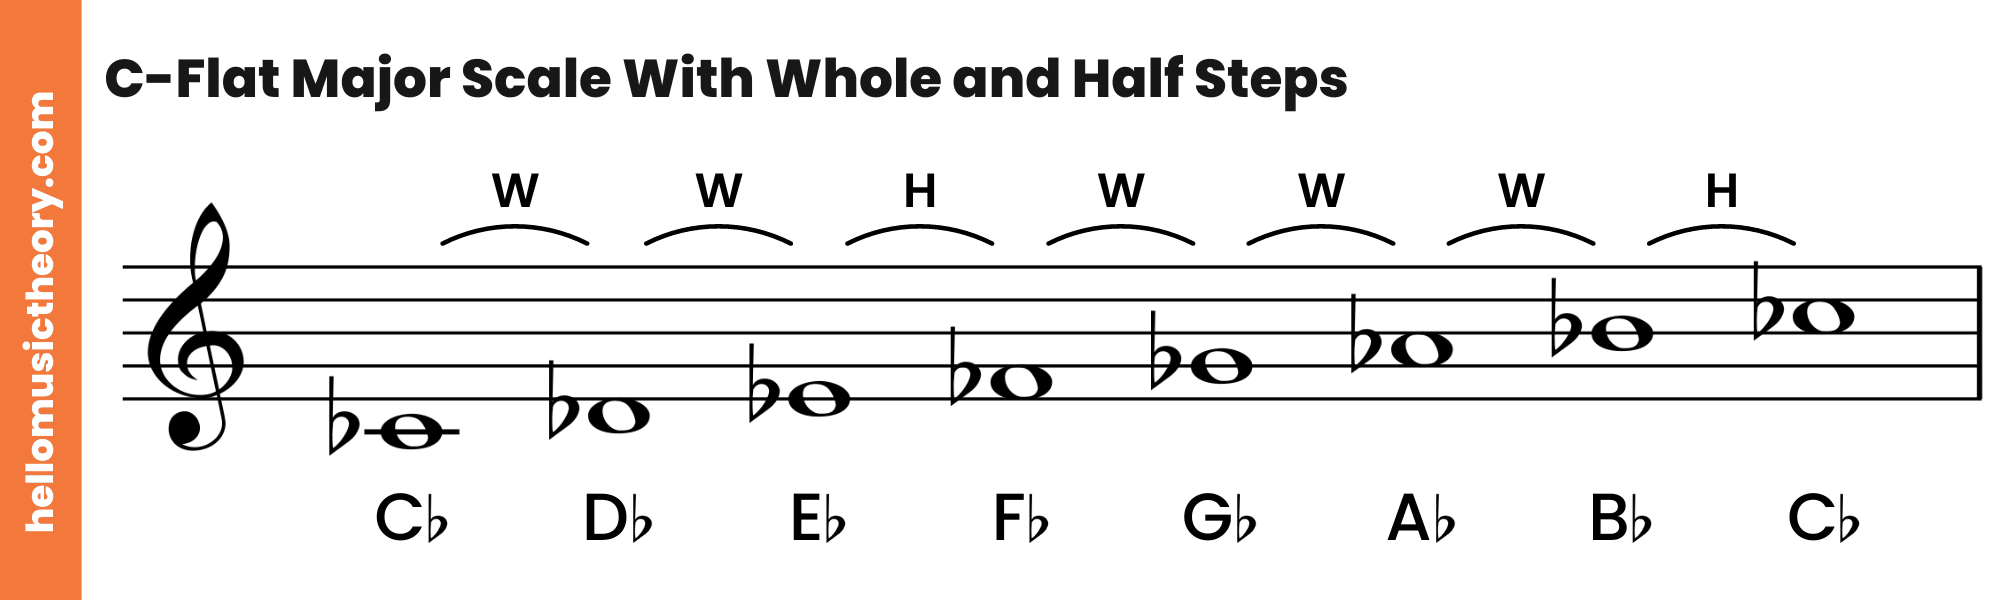 C-Flat Major Scale Treble Clef With Whole and Half Steps